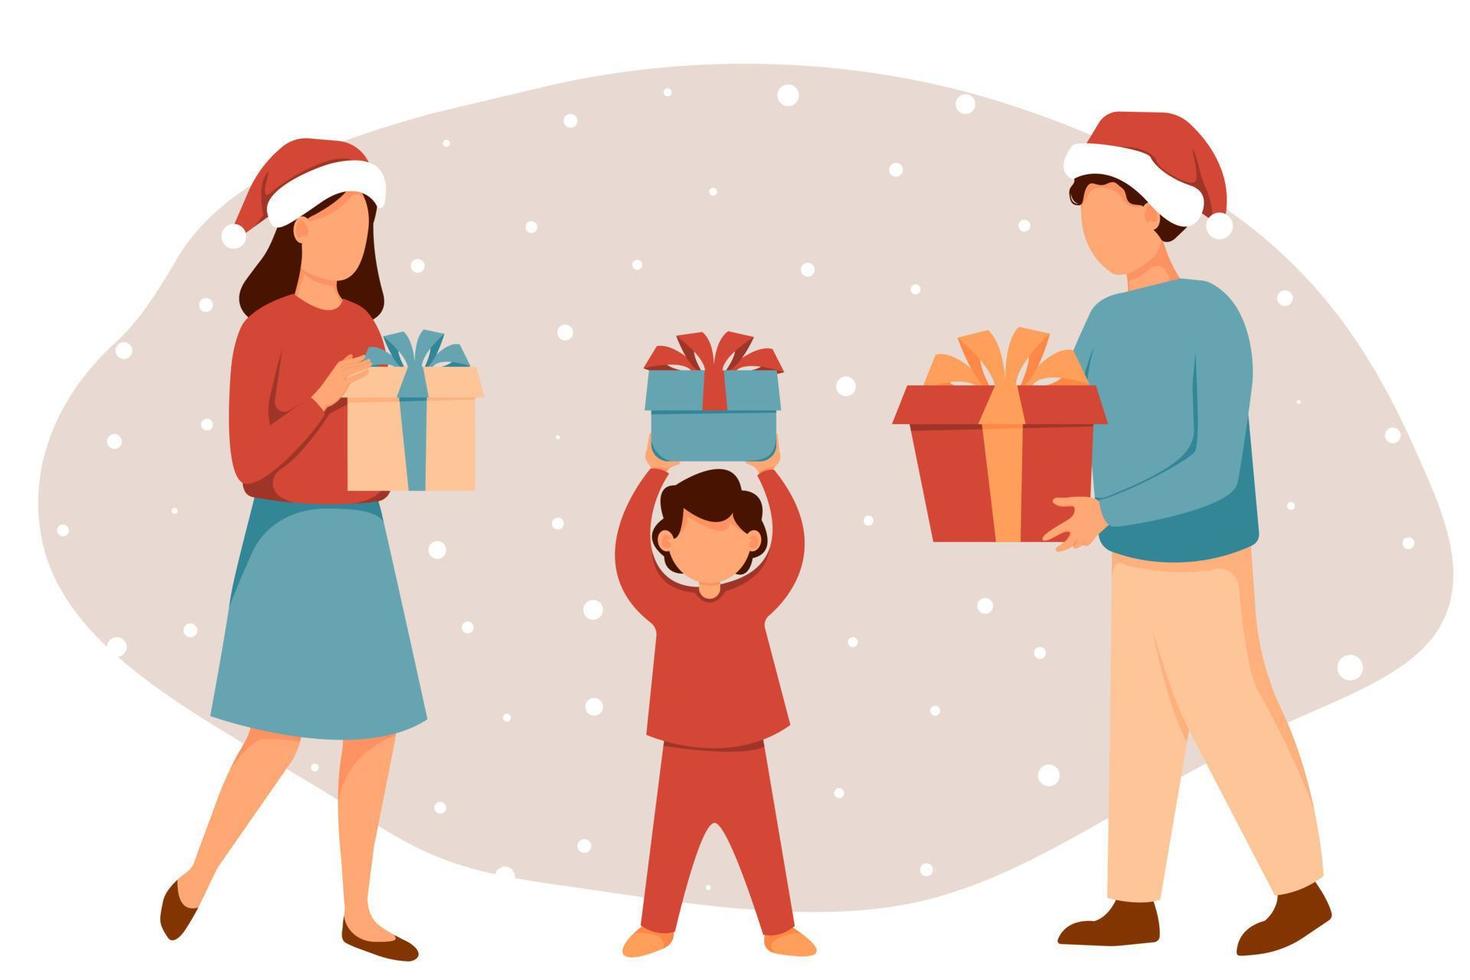 Family holding presents in her hands. Vector illustration in flat style.